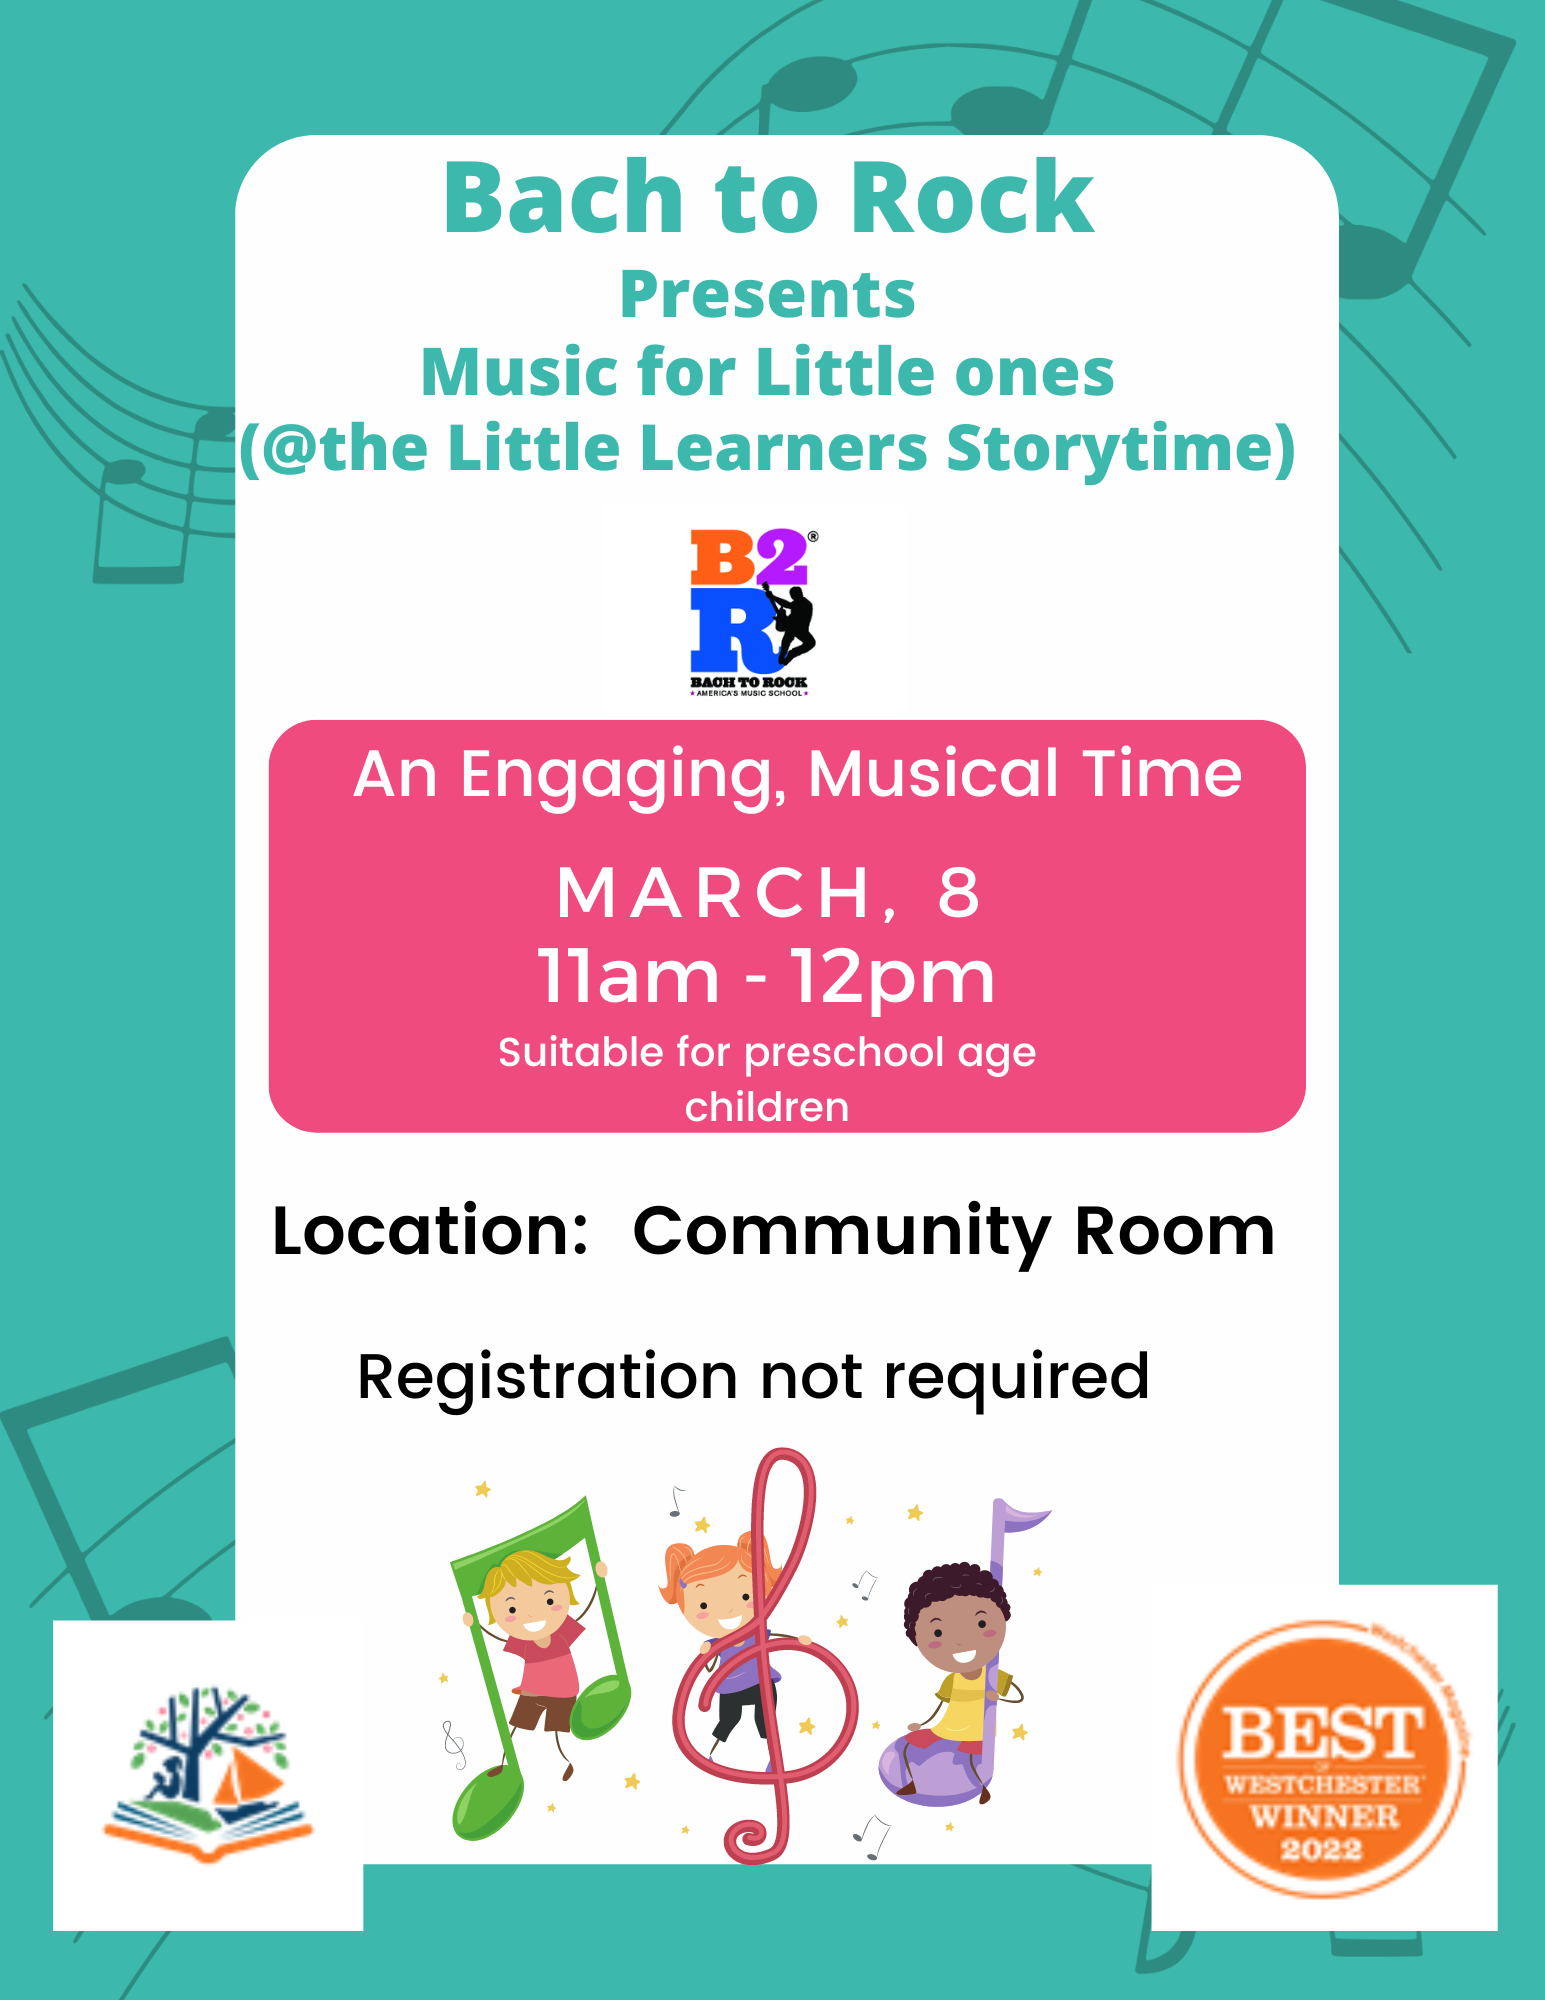 3/8 @ 11-Noon Bach to Rock for pre-schoolers in the community room